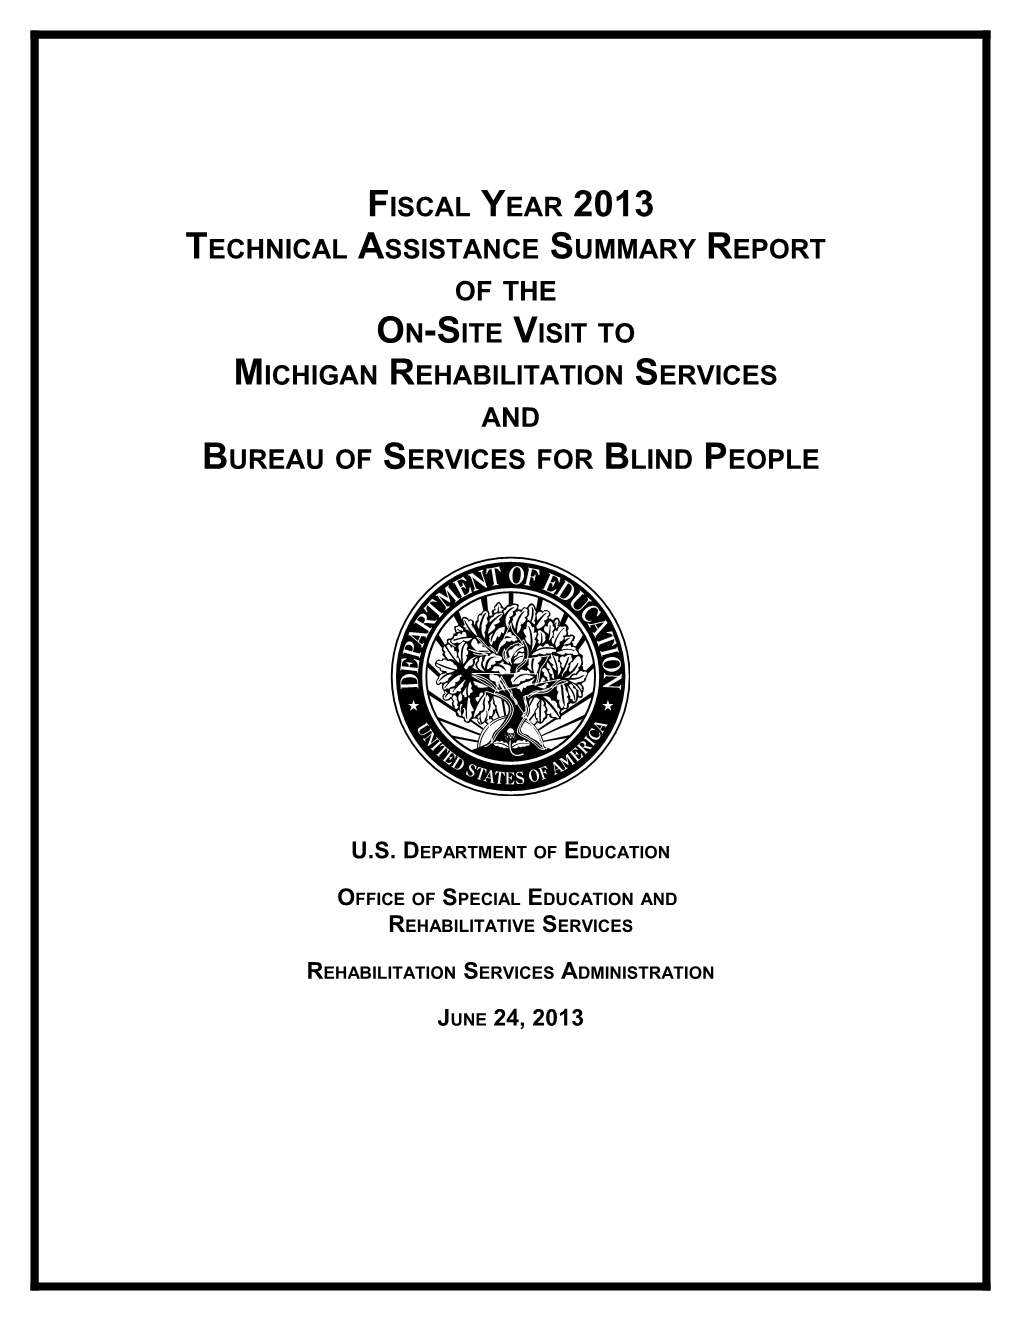 FY 2013 Technical Assistance Summary Report of the On-Site Visit to Michigan Rehabilitation